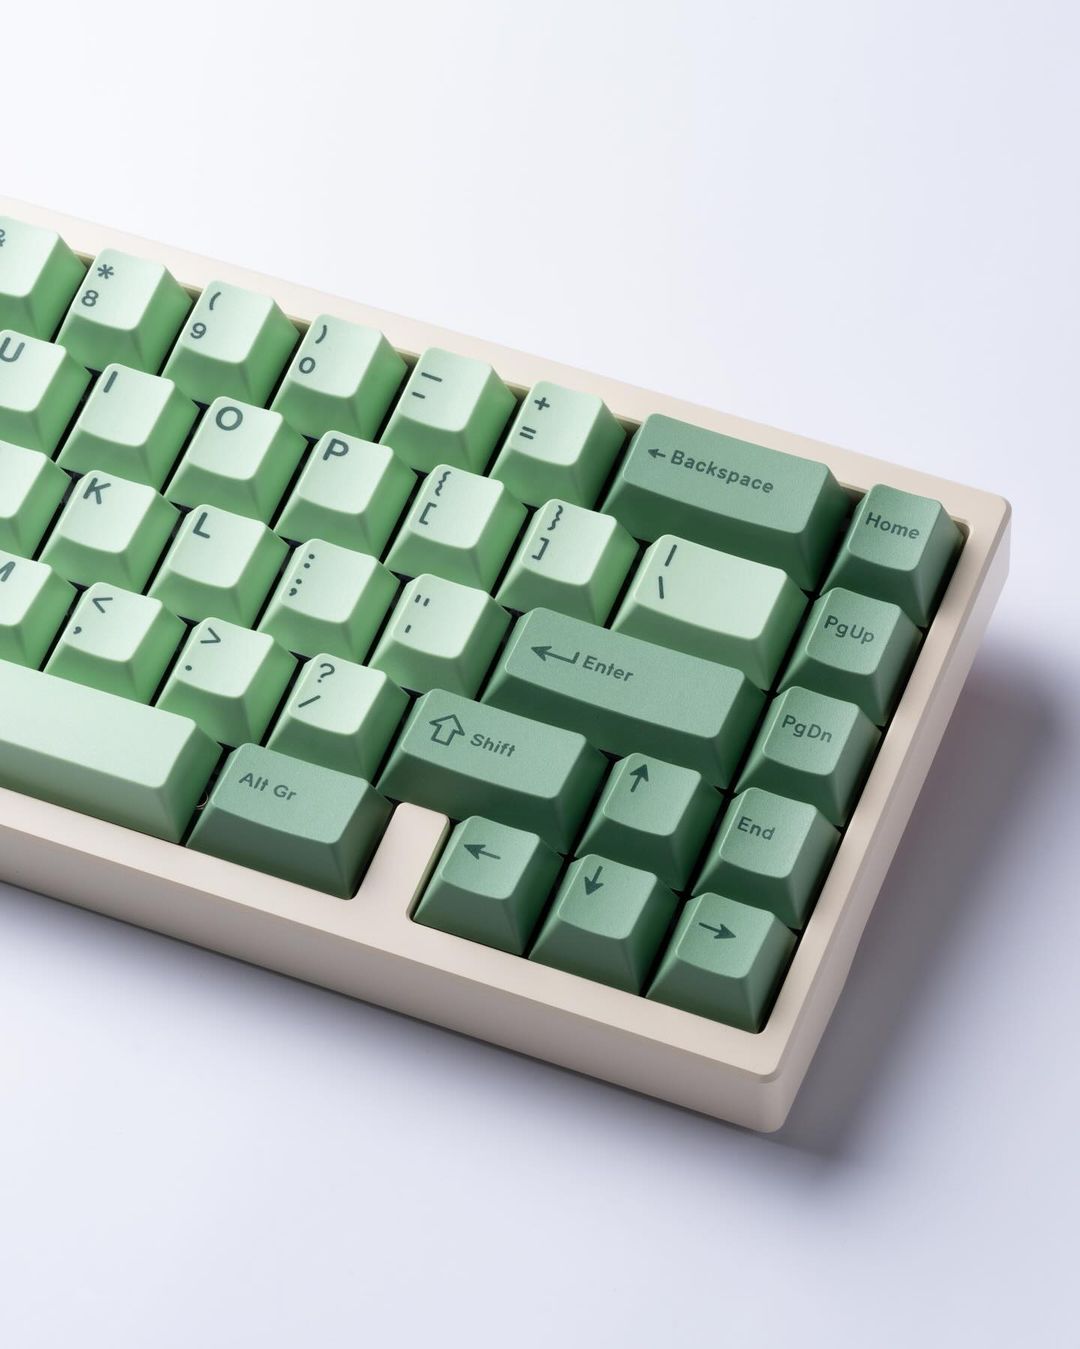 [GB] Krush65 Case and Weight only